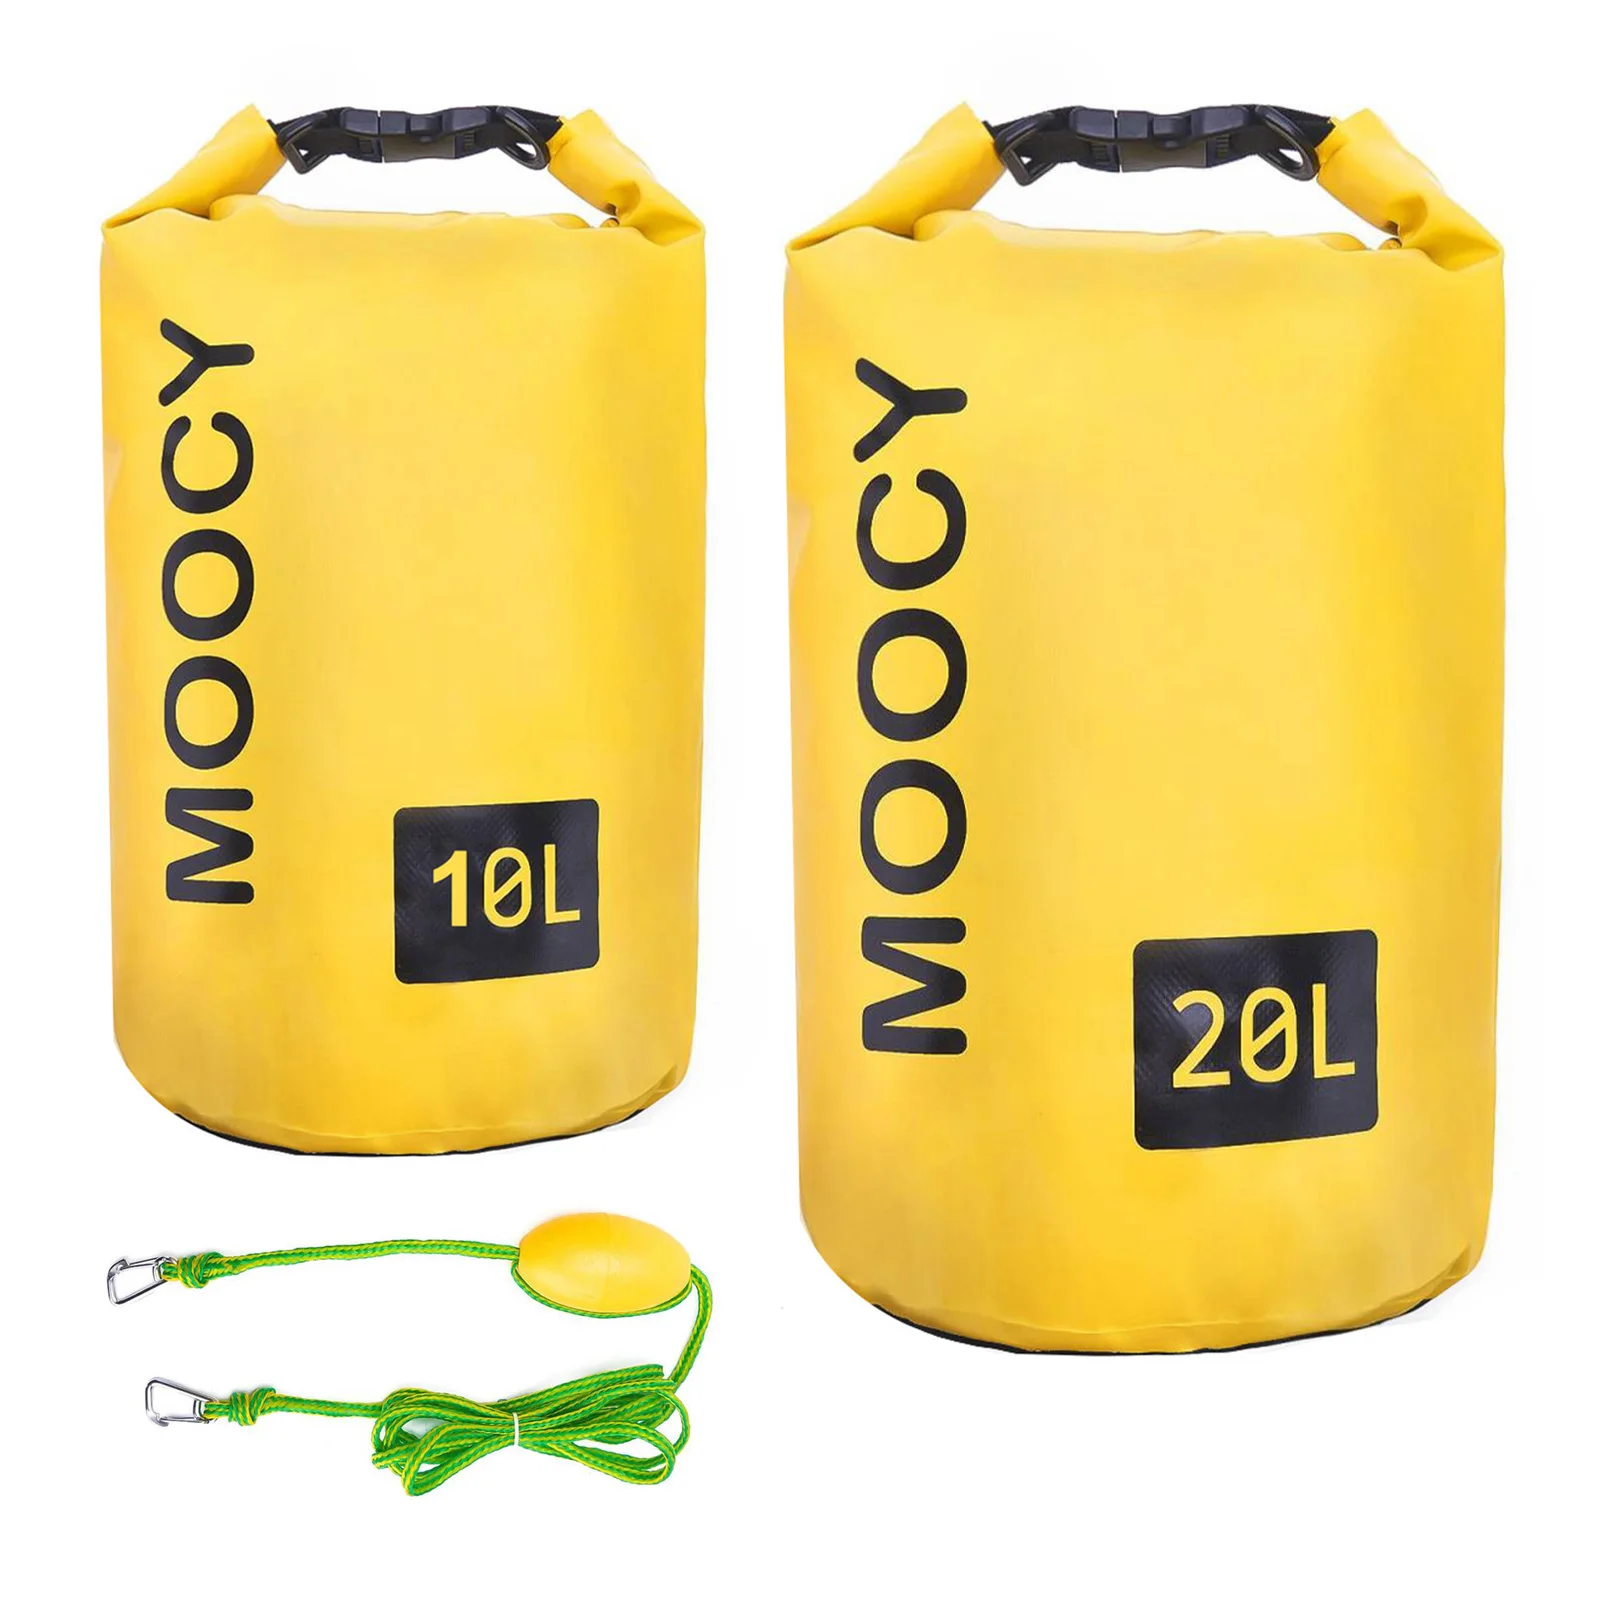 

2-in-1 Sand Anchor Drift Bag Waterproof Dry Bag Sand Anchor Multiple Functions Rugged and Heavy-duty High Visibility easy to use